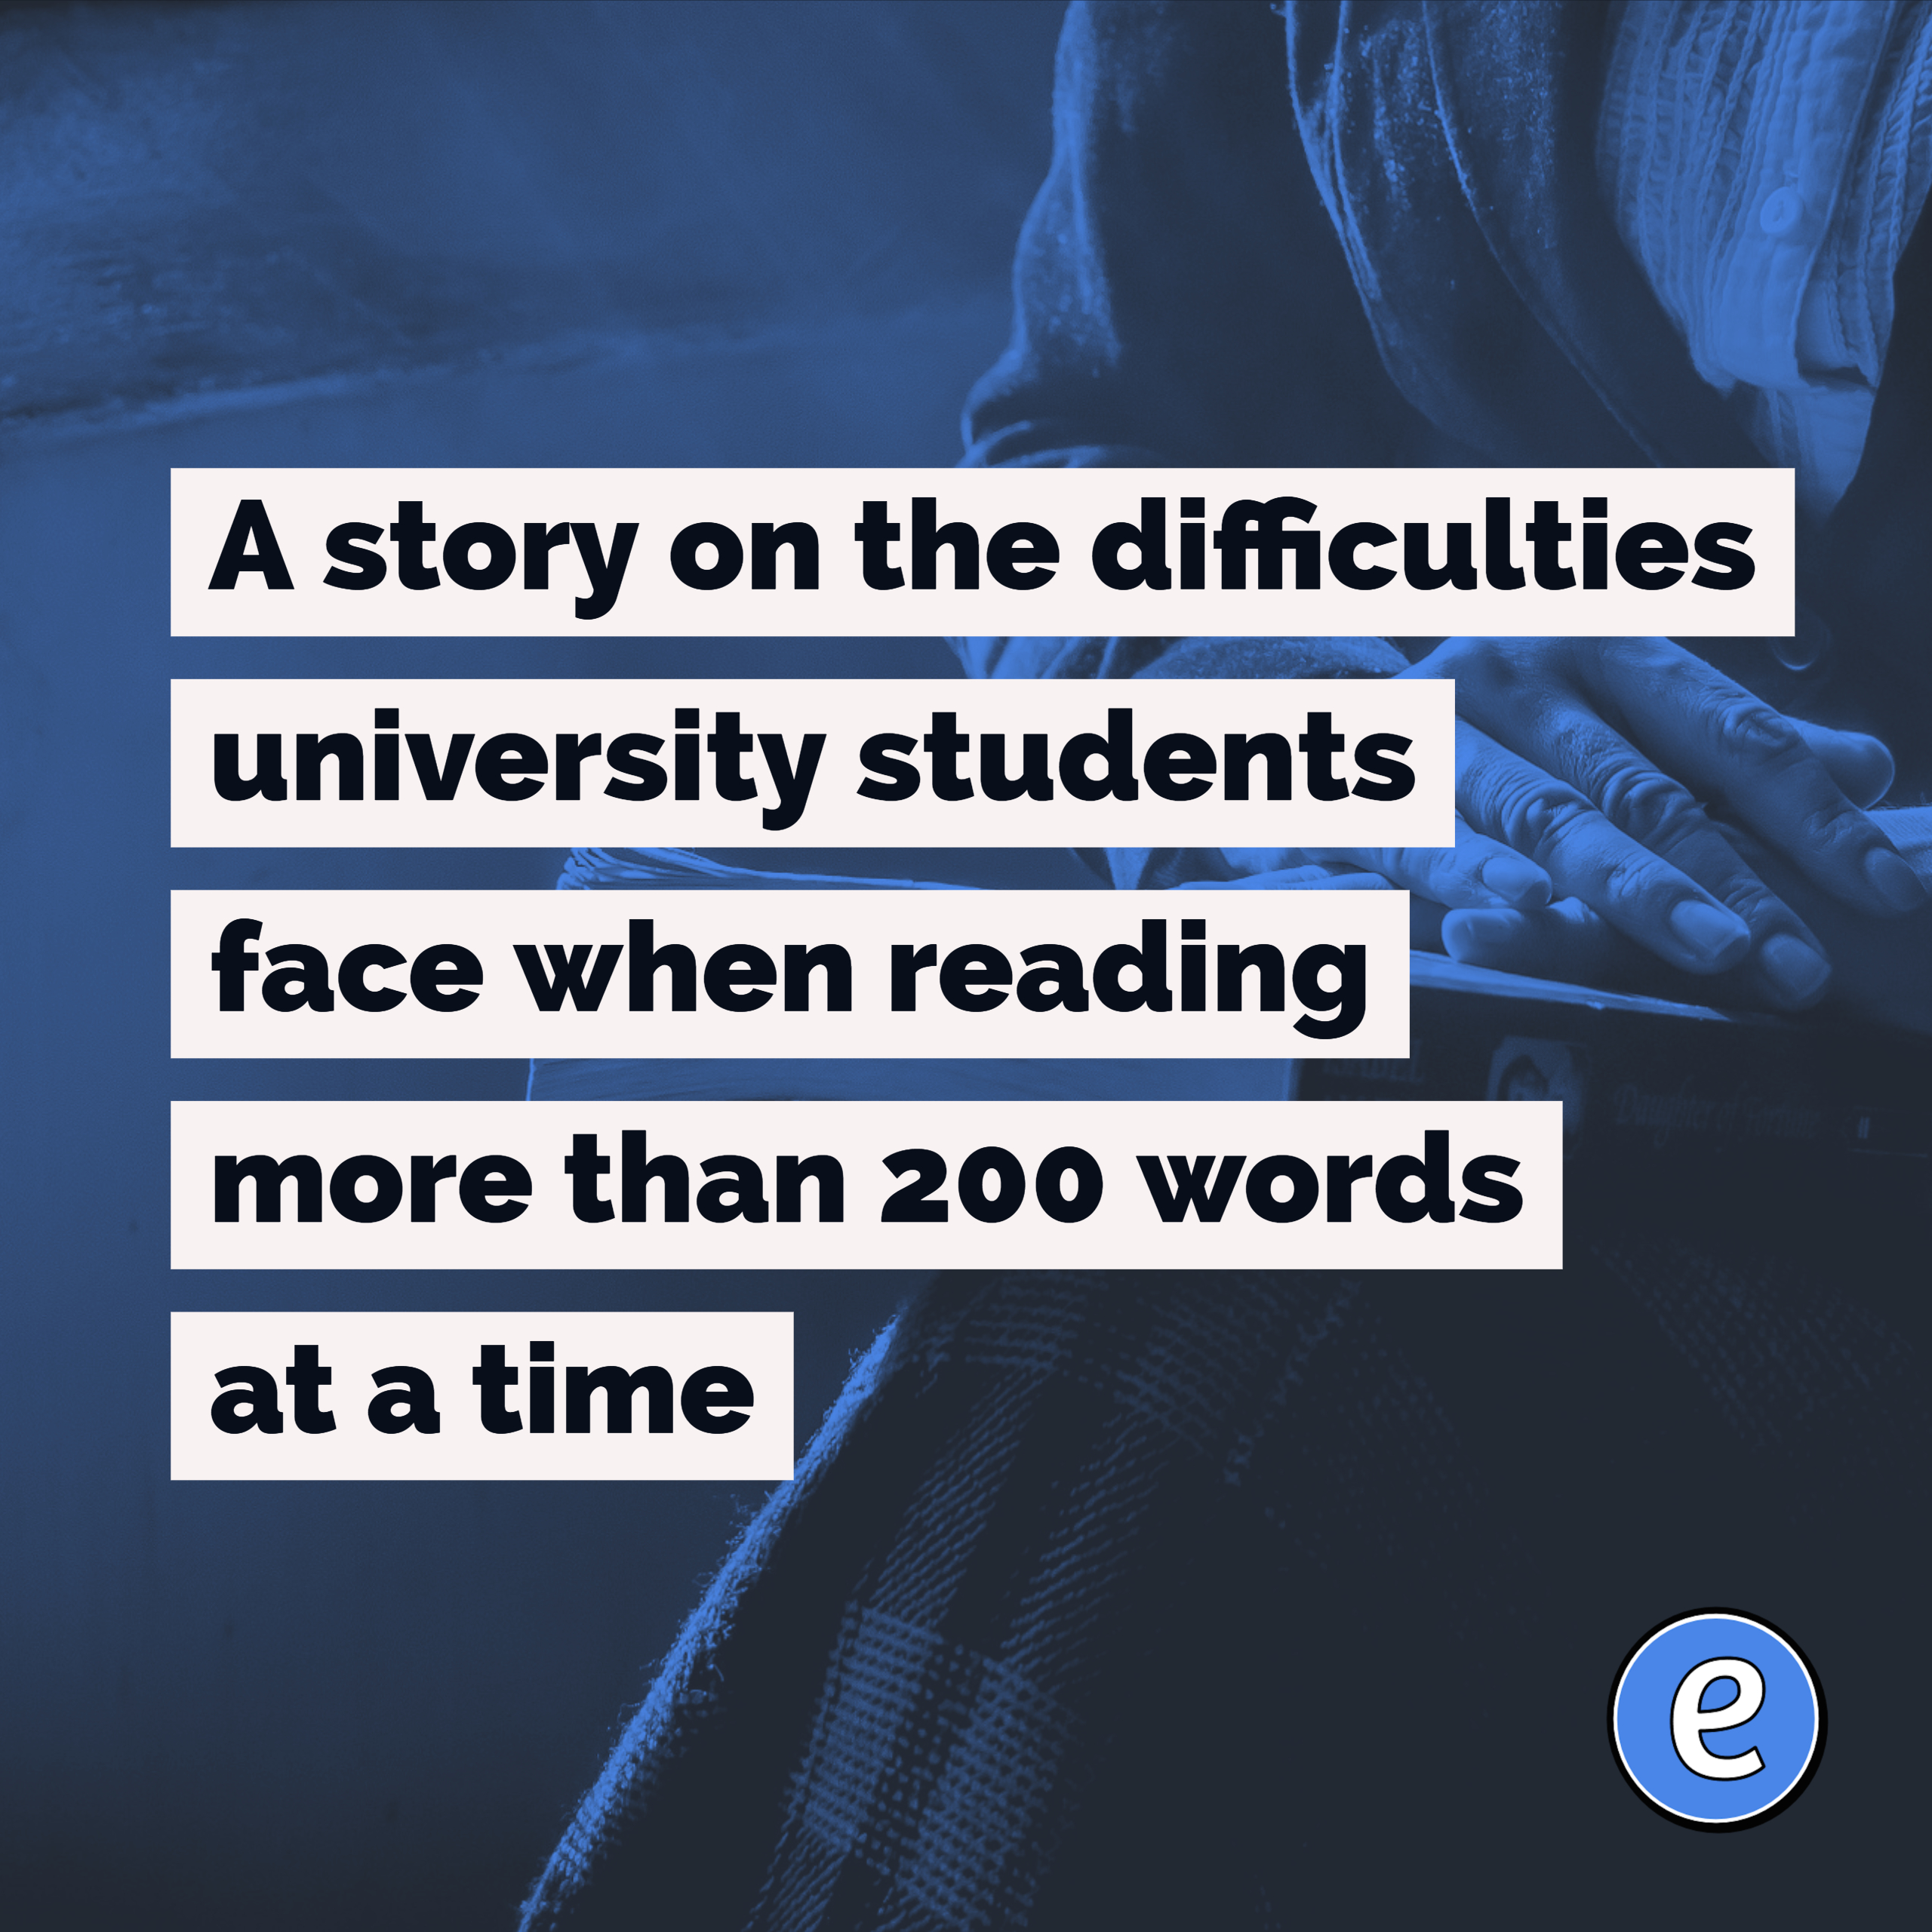 A story on the difficulties university students face when reading more than 200 words at a time